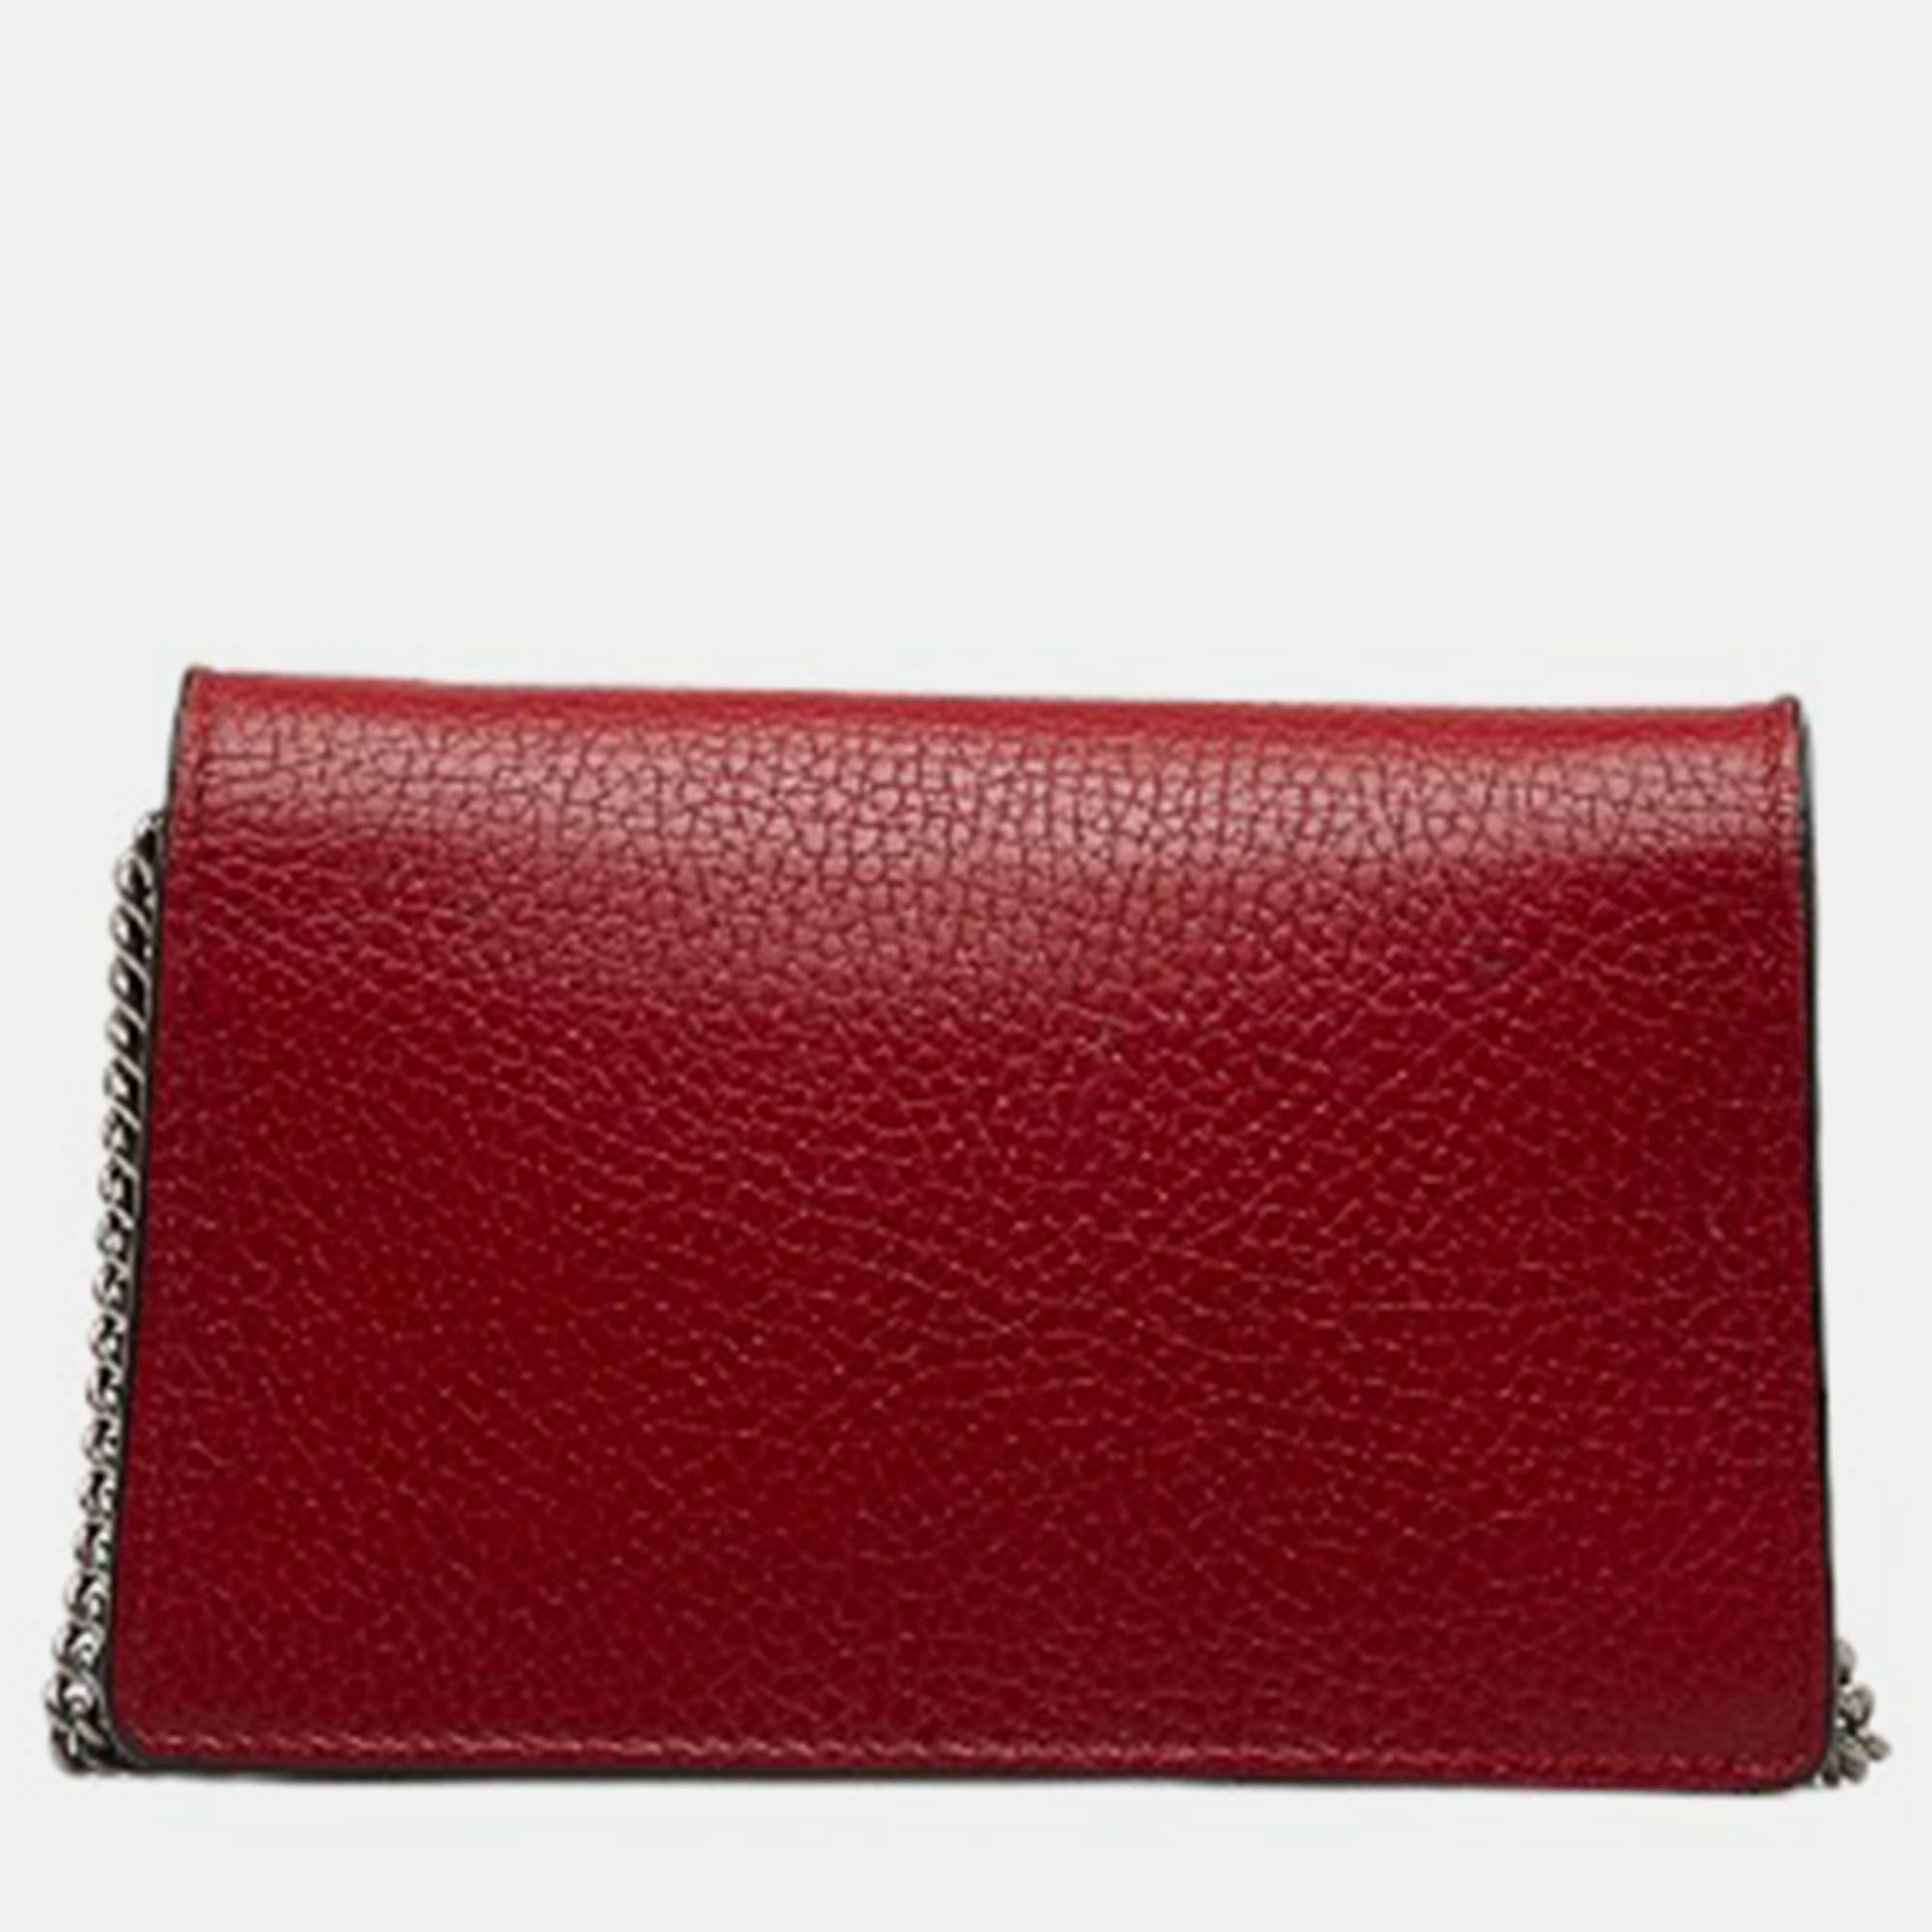 Gucci Red Leather Super Mini Leather Dionysus Crossbody Bag